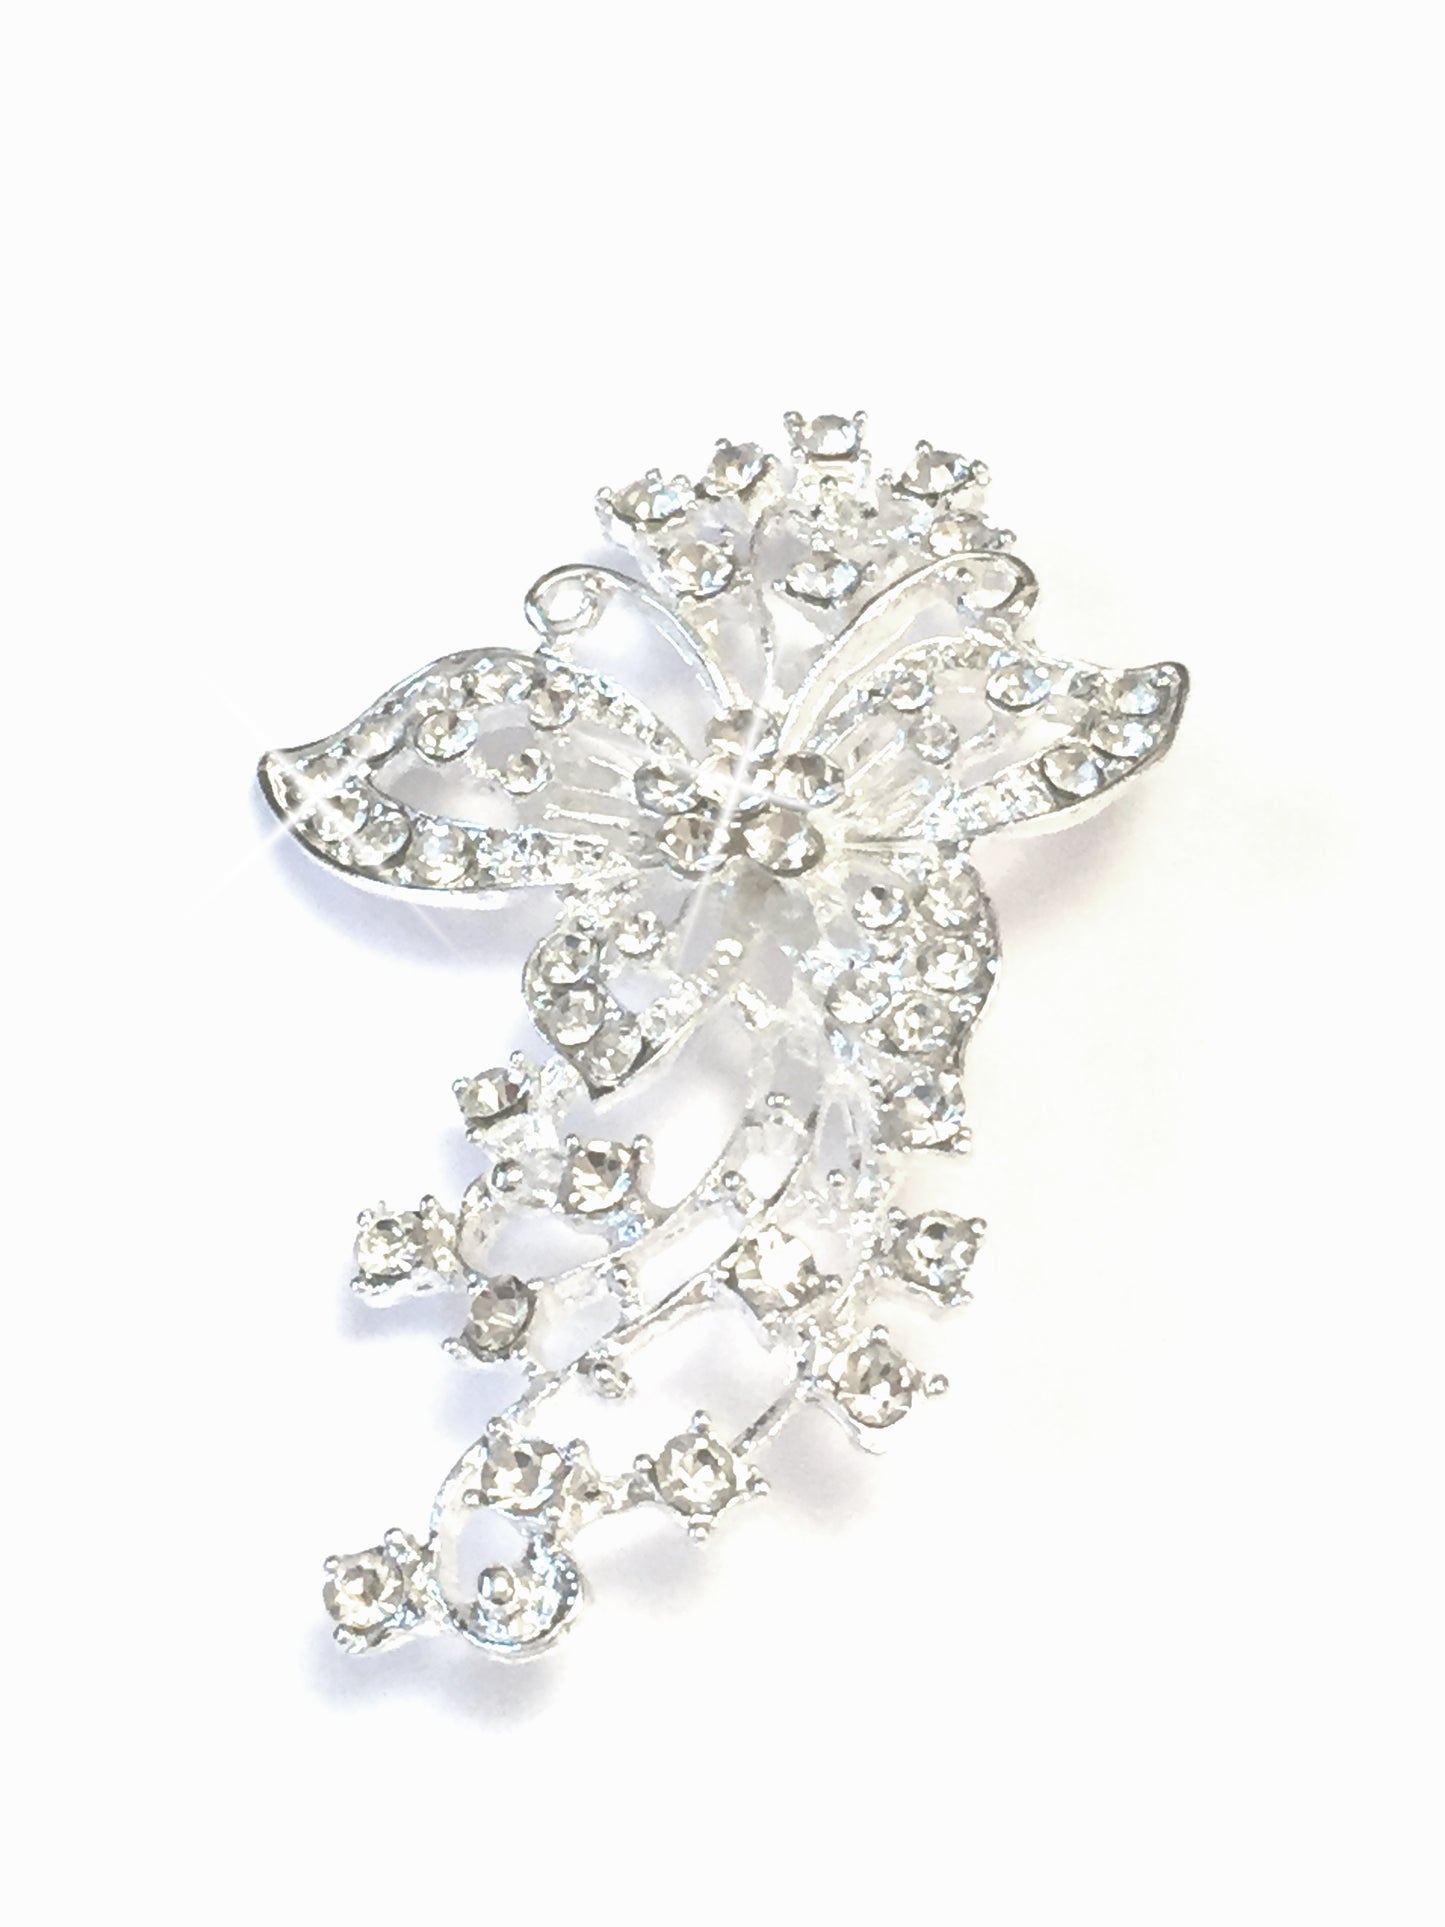 Sparkling Butterfly Brooch, This beautiful brooch is intricately designed with sparkling crystals, embracing a silver toned metal vine with a beautiful distinguished butterfly, with a pin & catch fastening